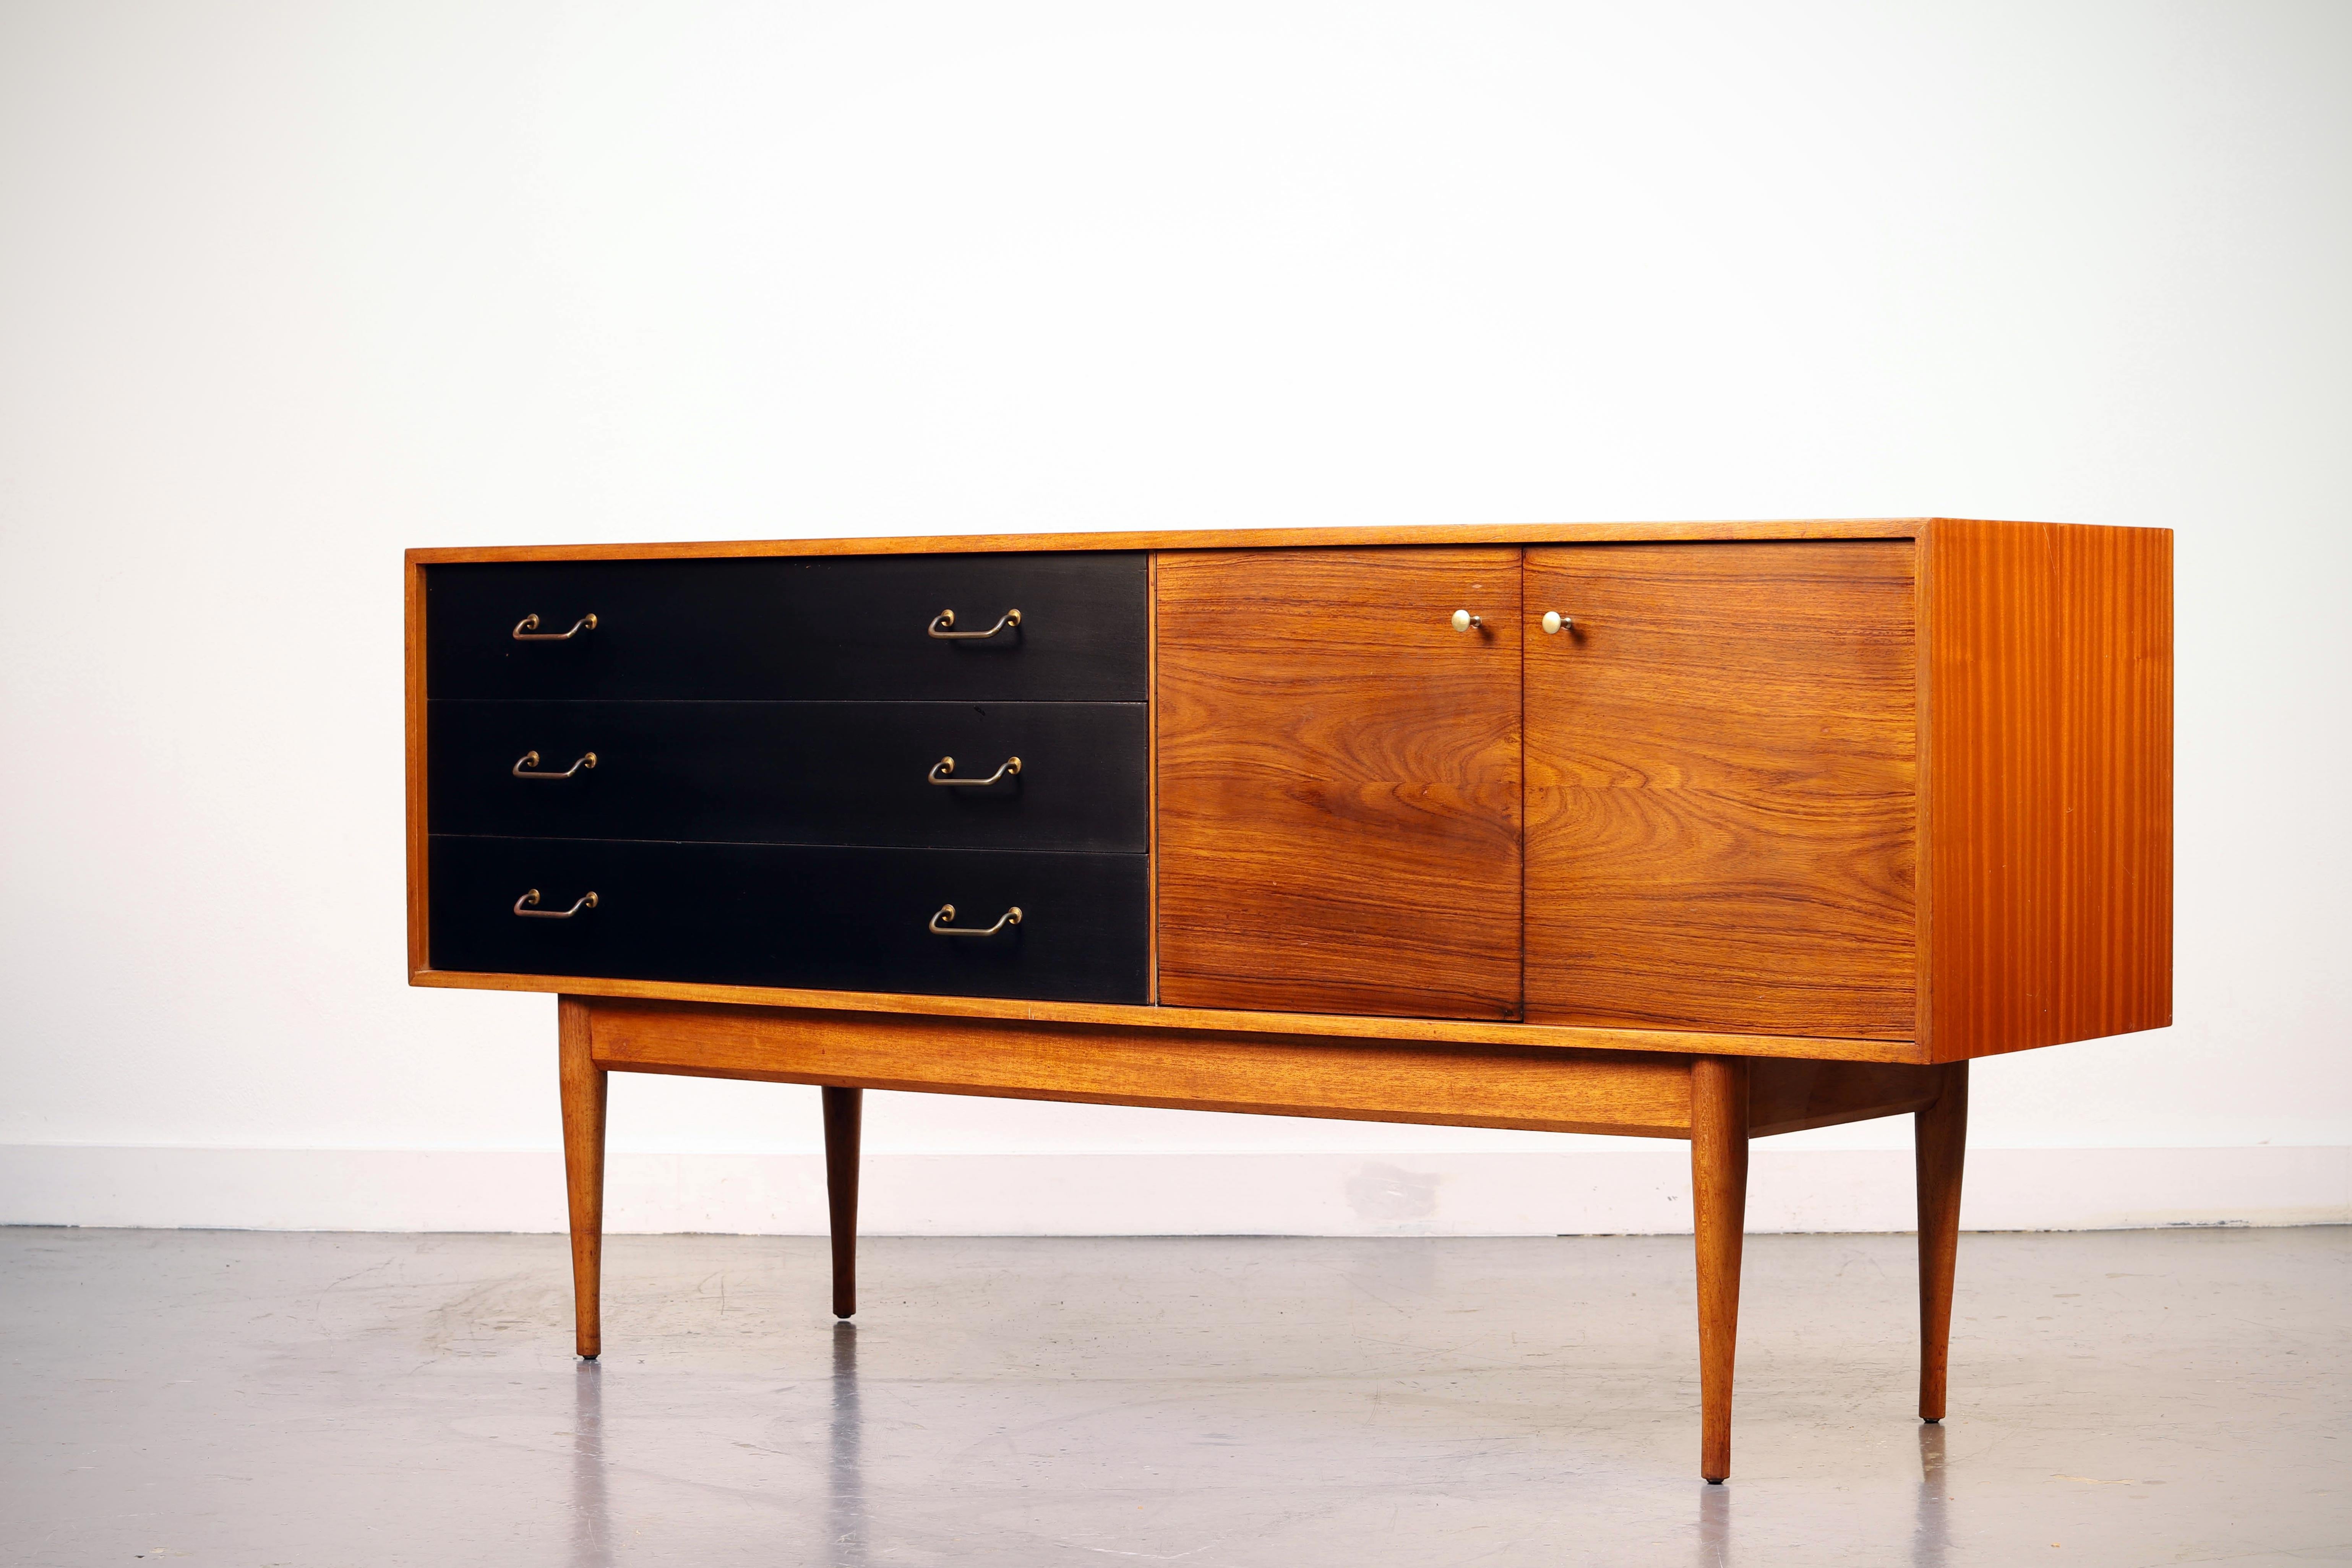 This is a superb vintage sideboard in rosewood and mahogany, it was made by Uniflex. Beautiful color, impressive grain patterns, and also has a black finish on the drawers.
 